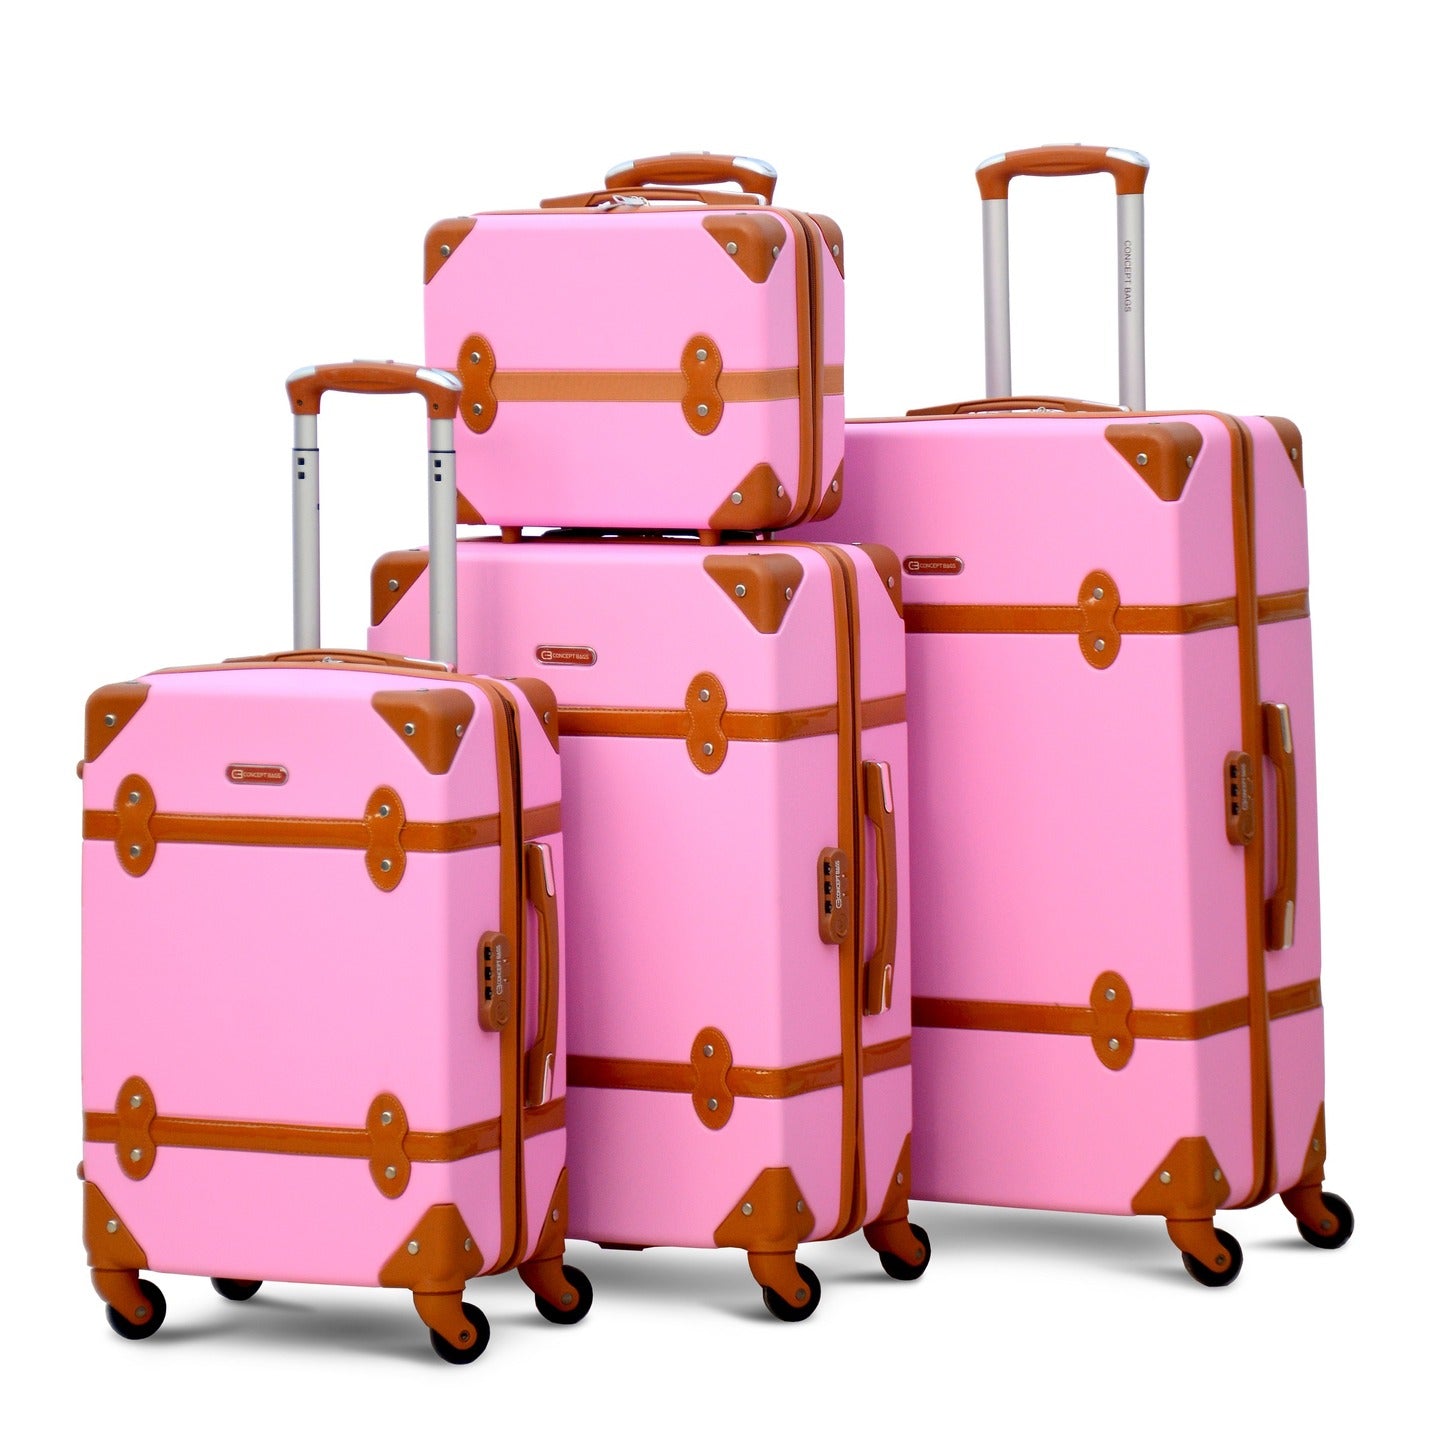 4 Piece Set 7" 20" 24" 28 Inches Corner Guard ABS Lightweight Luggage Bag with Spinner Wheel